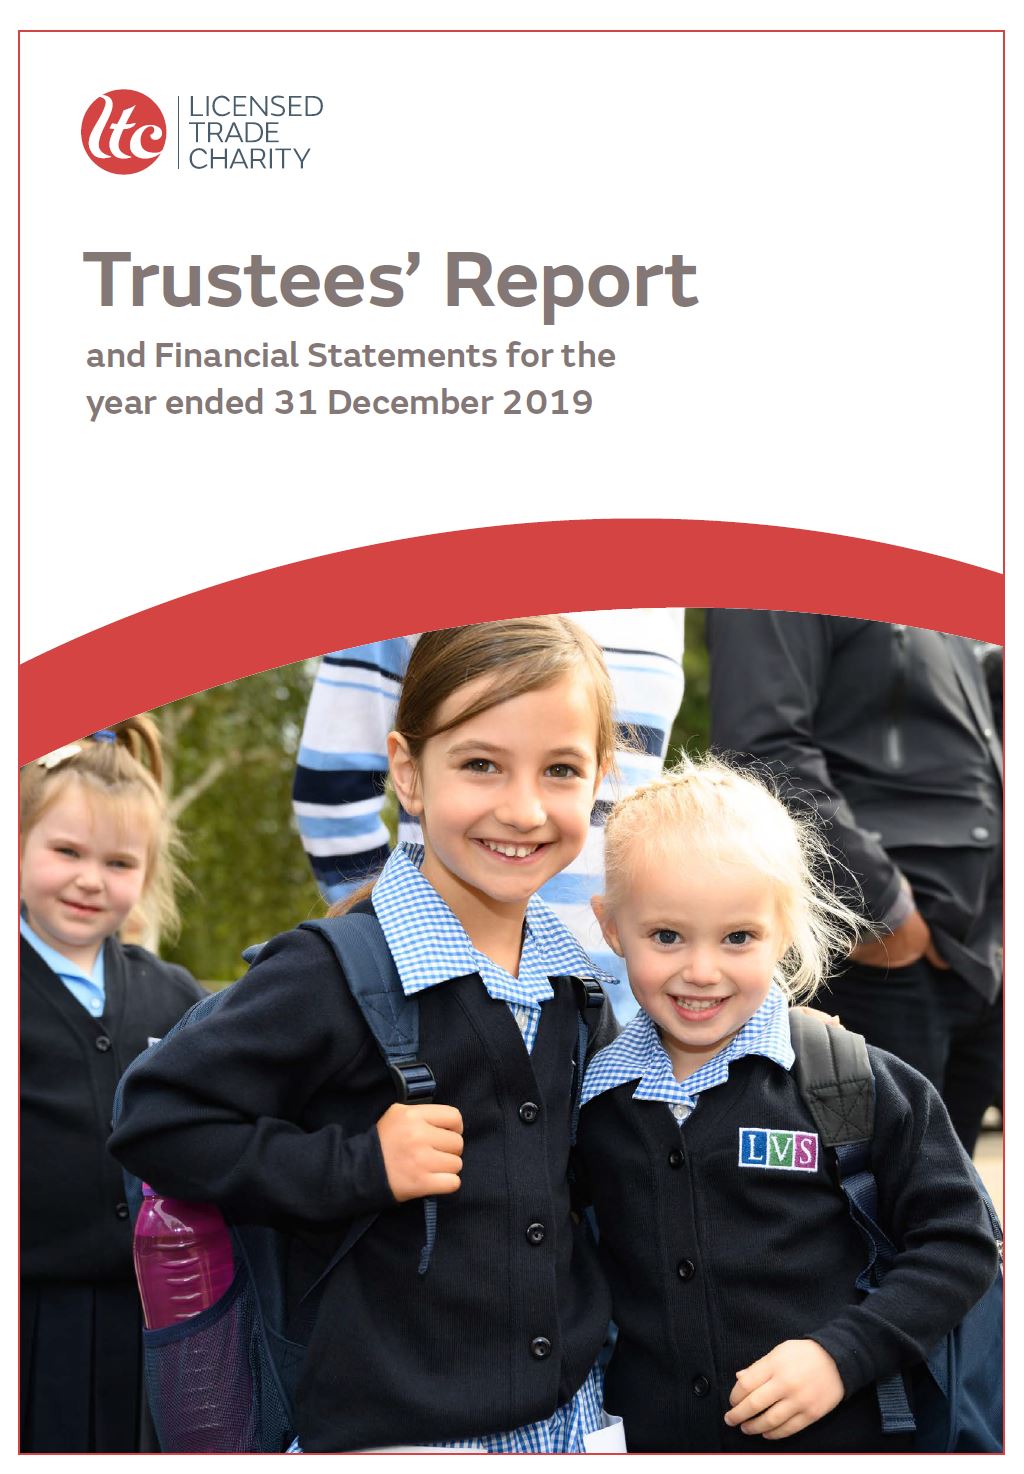 Licensed Trade Charity Trustee Report 2019